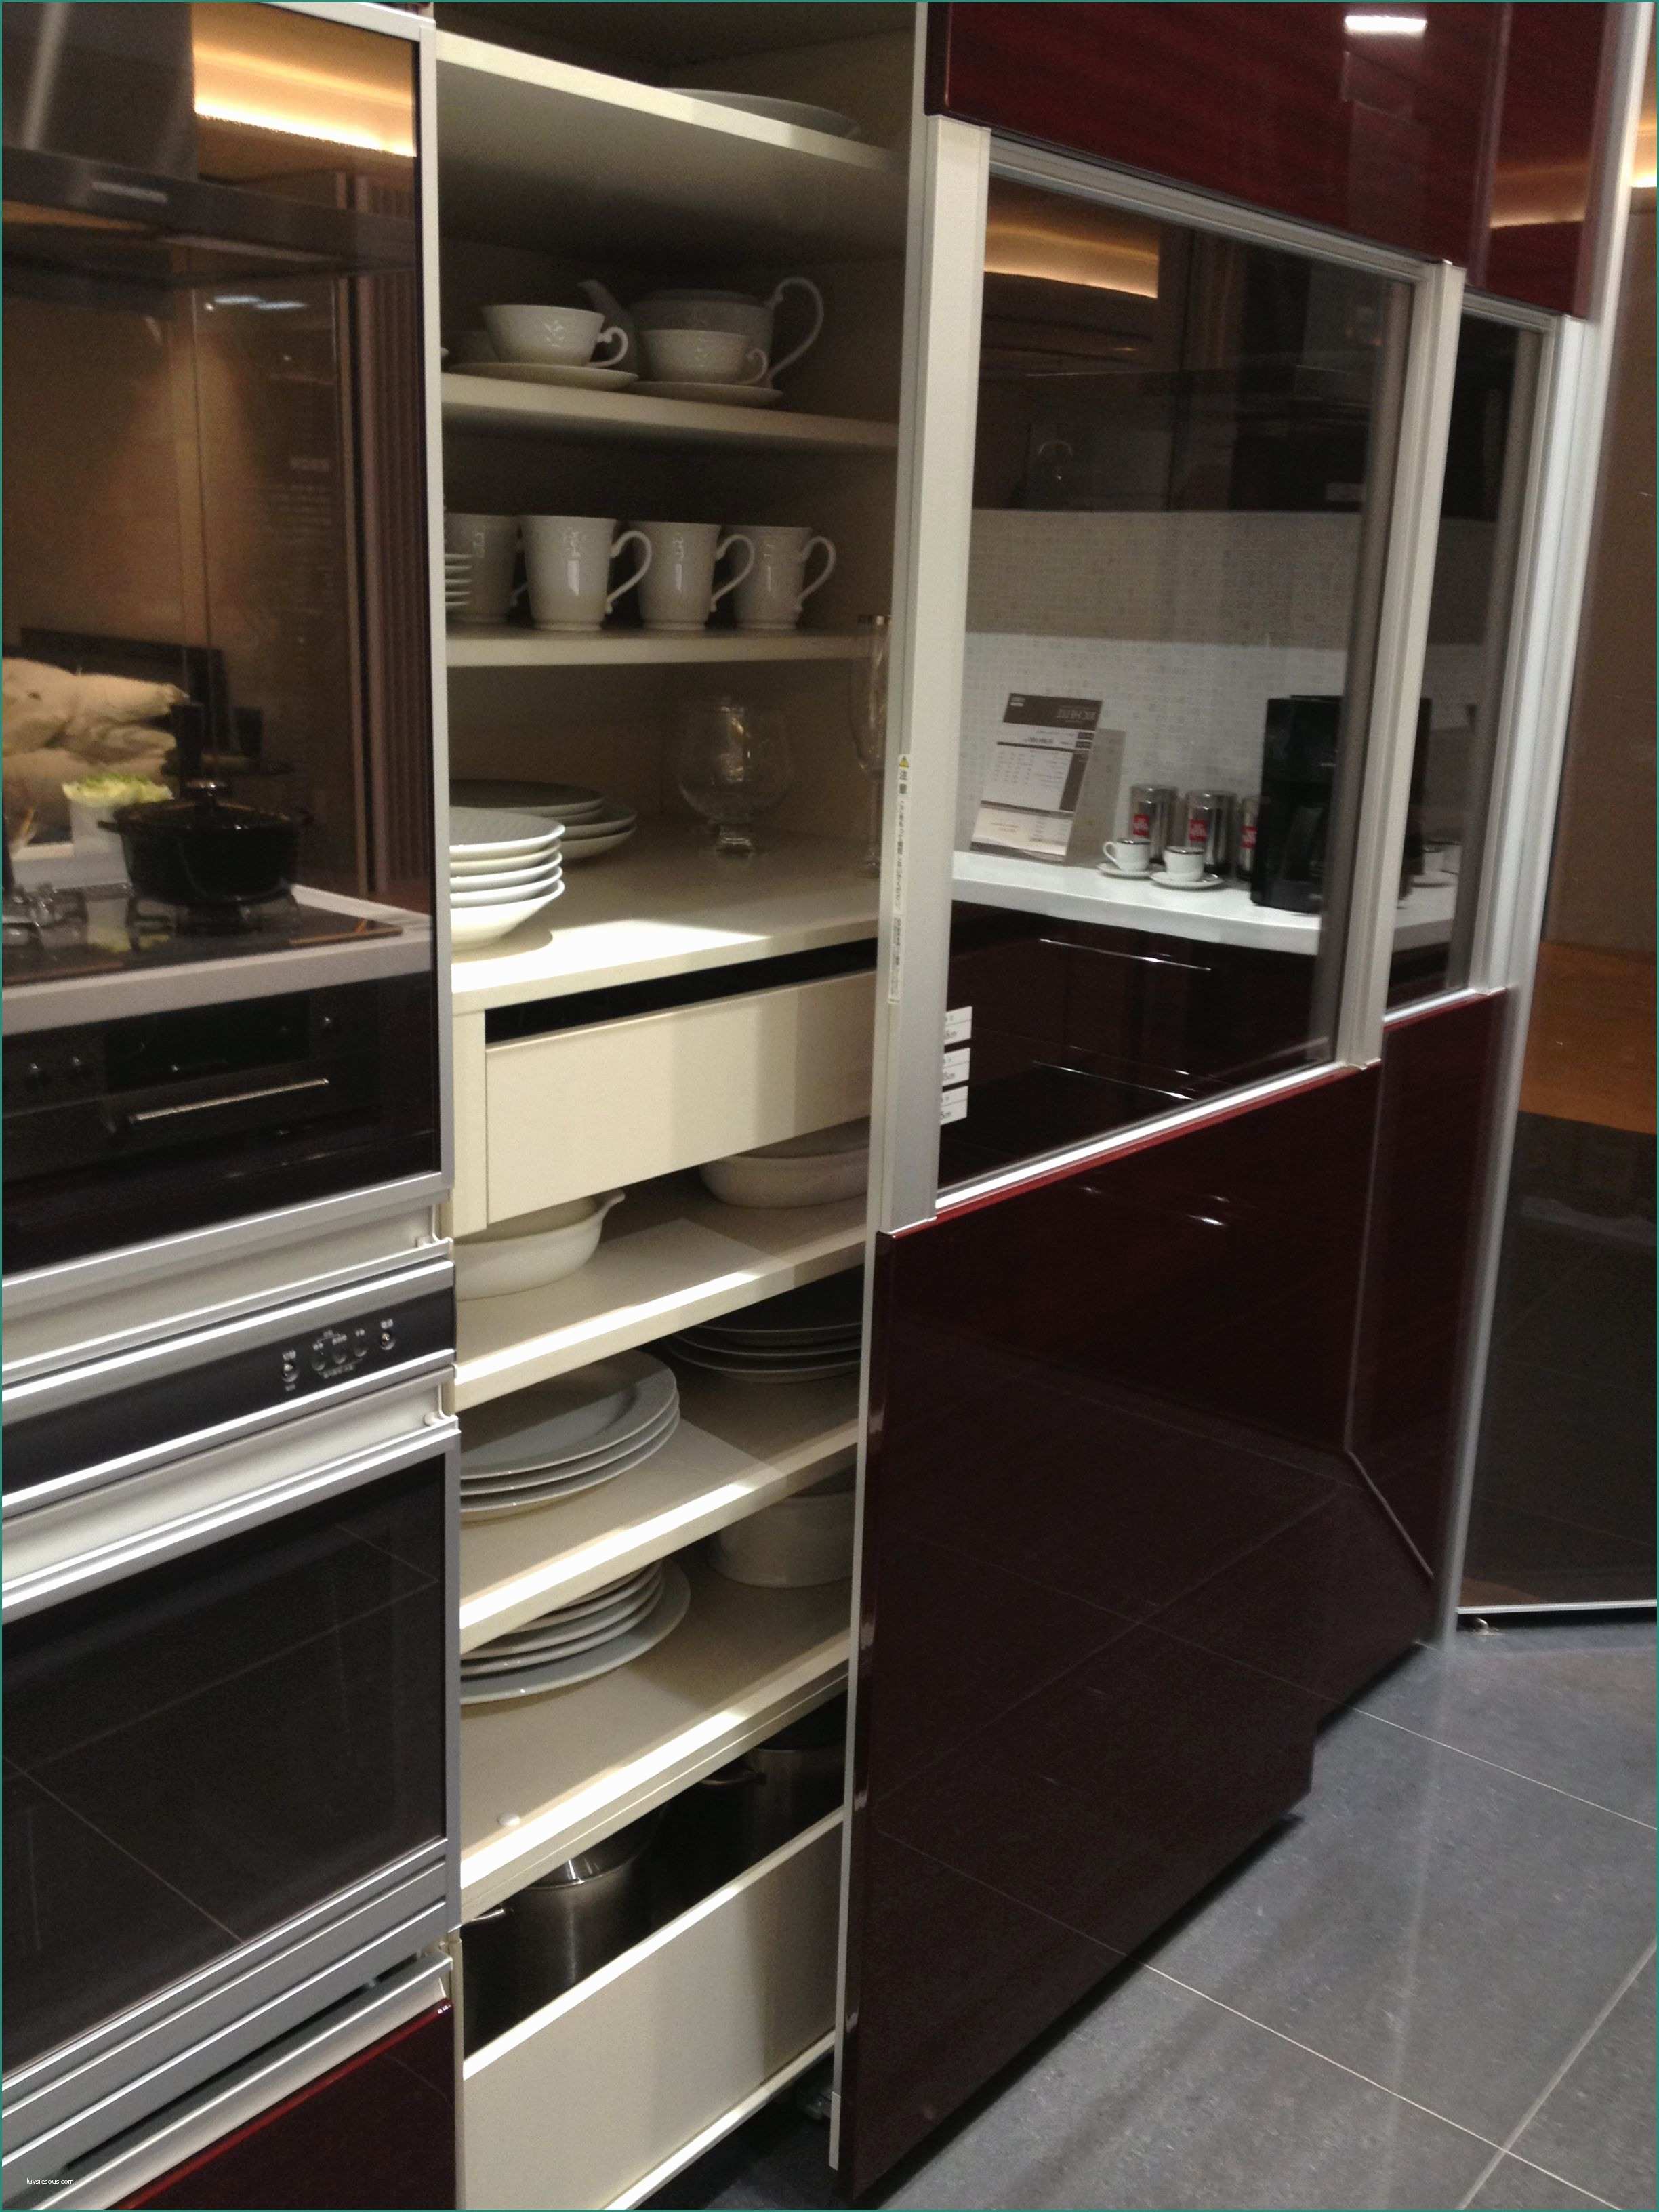 Soluzioni Cucine Piccole E Vertical Swinging Doors Pops Out then Move Sideway In Front Of the